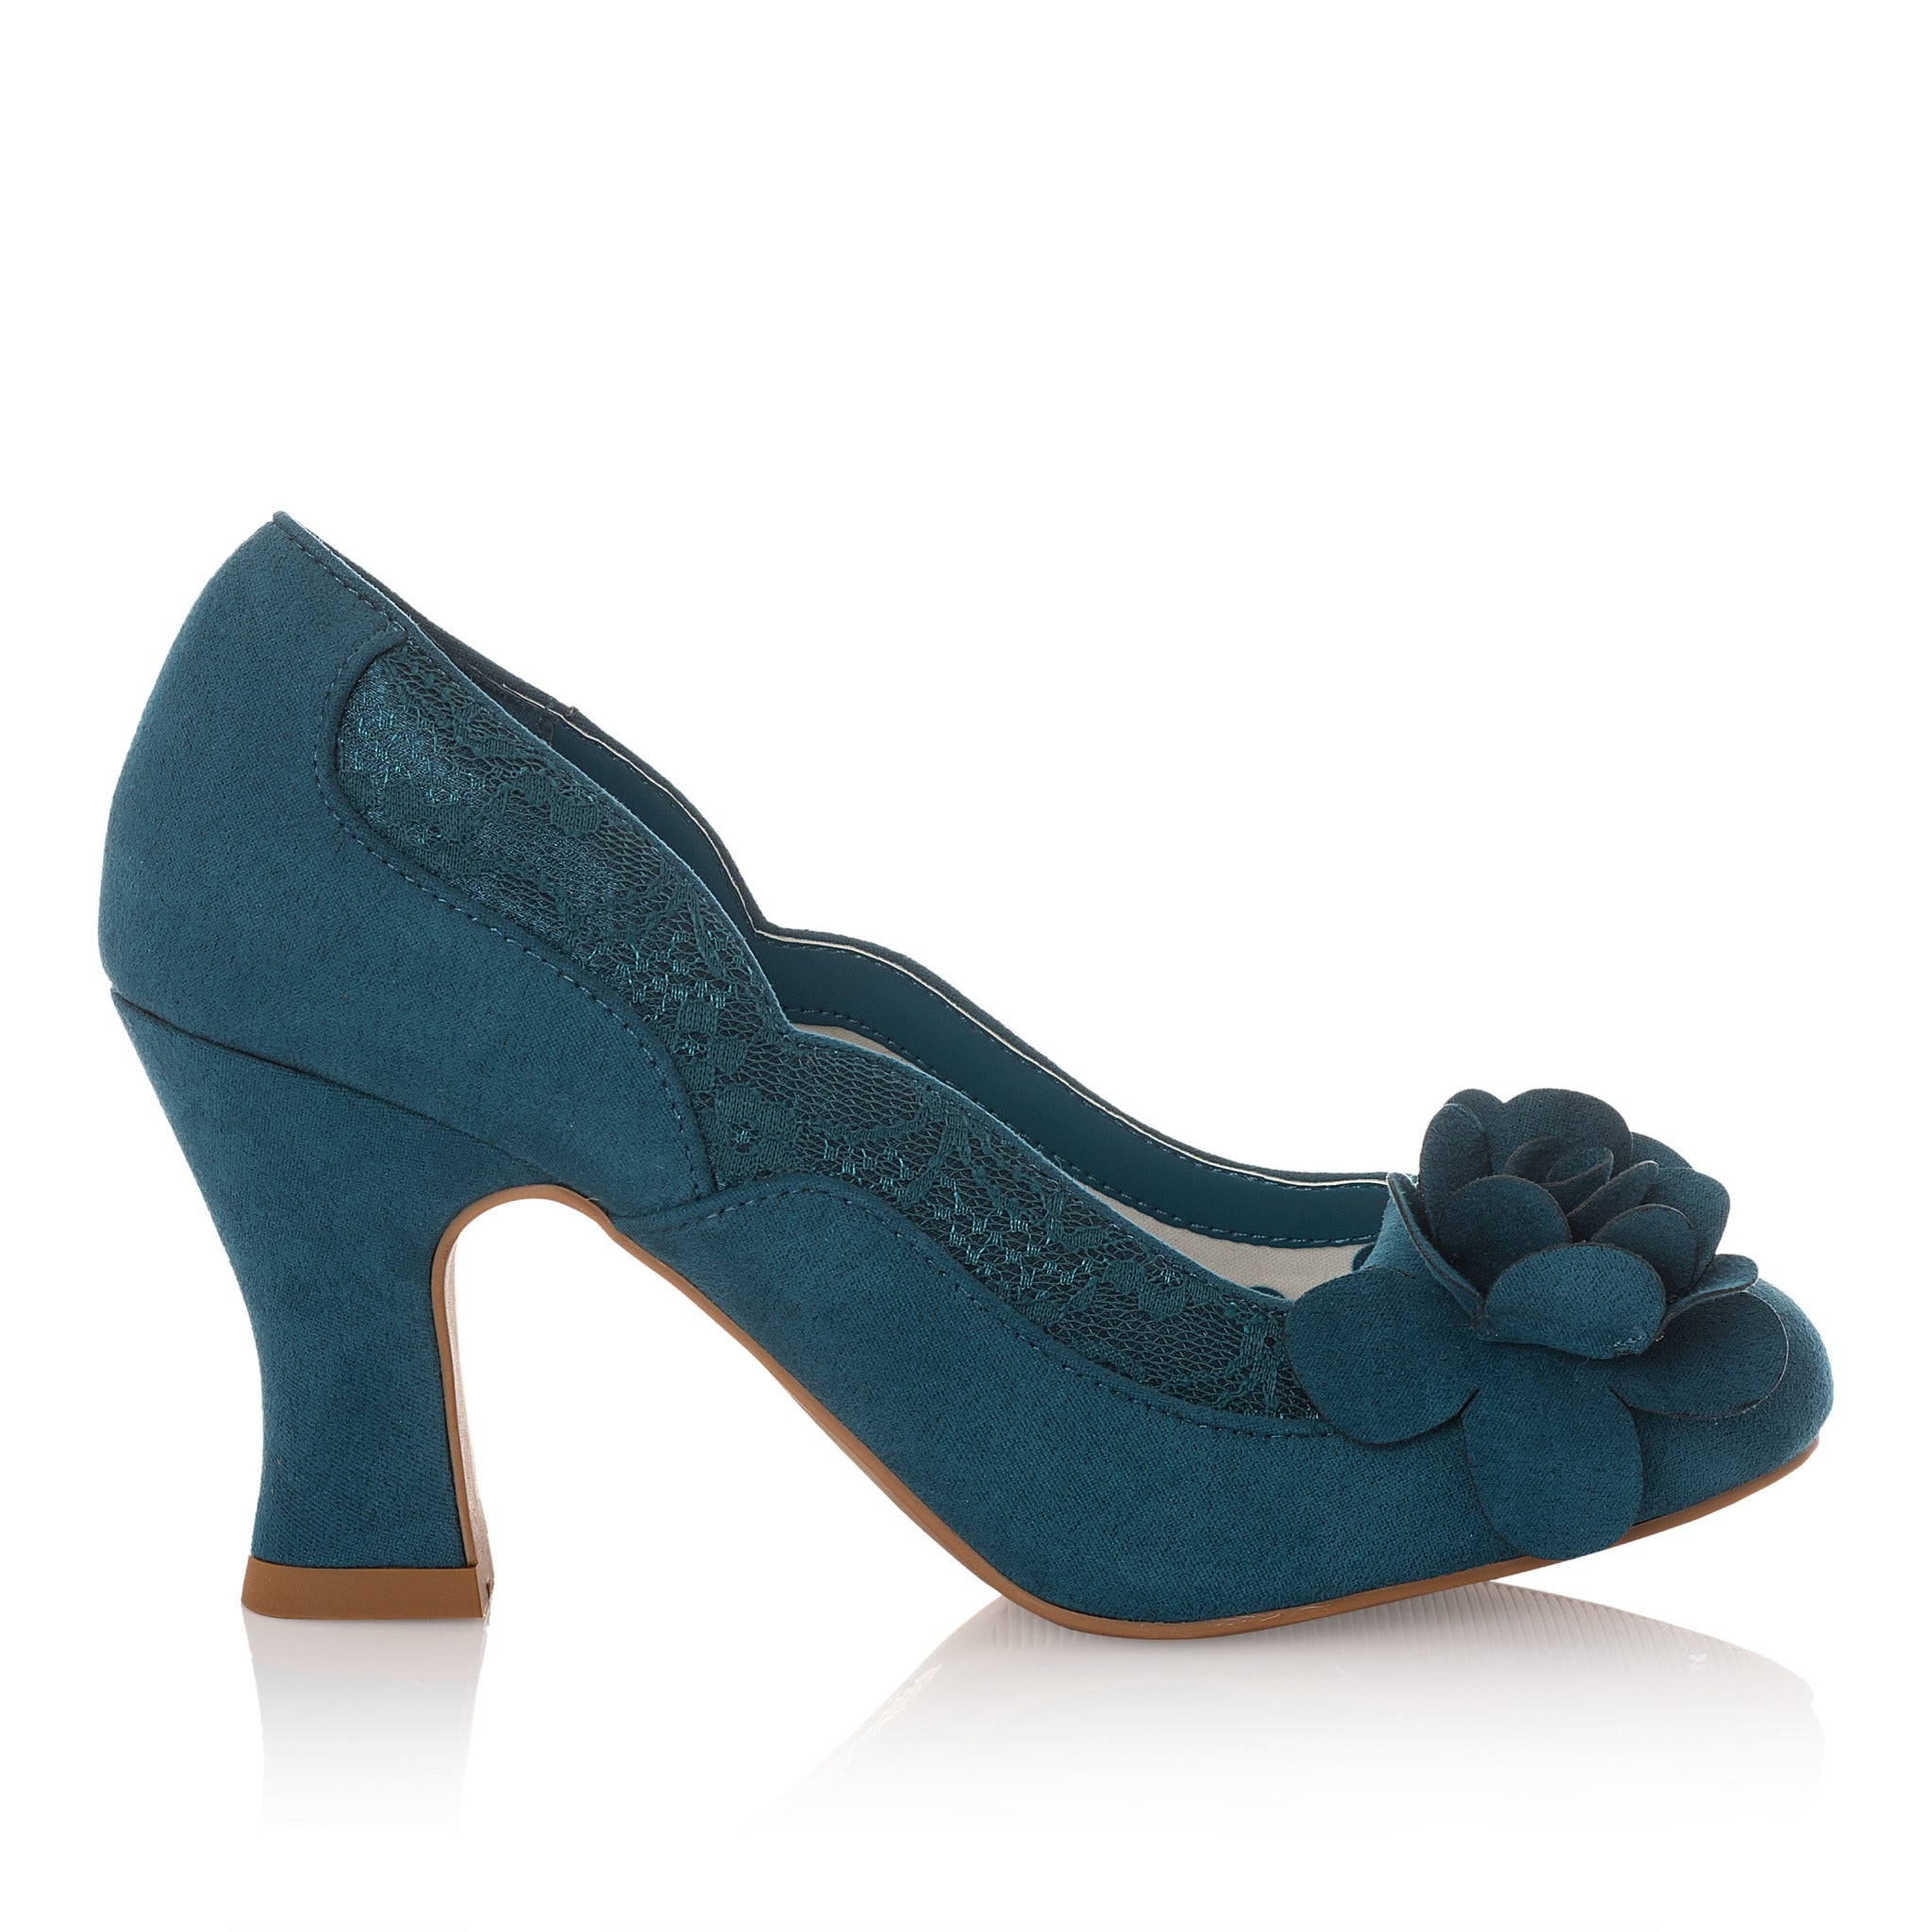 Ruby Shoo Chrissie Petrol Blue Heeled Corsage Court Shoes